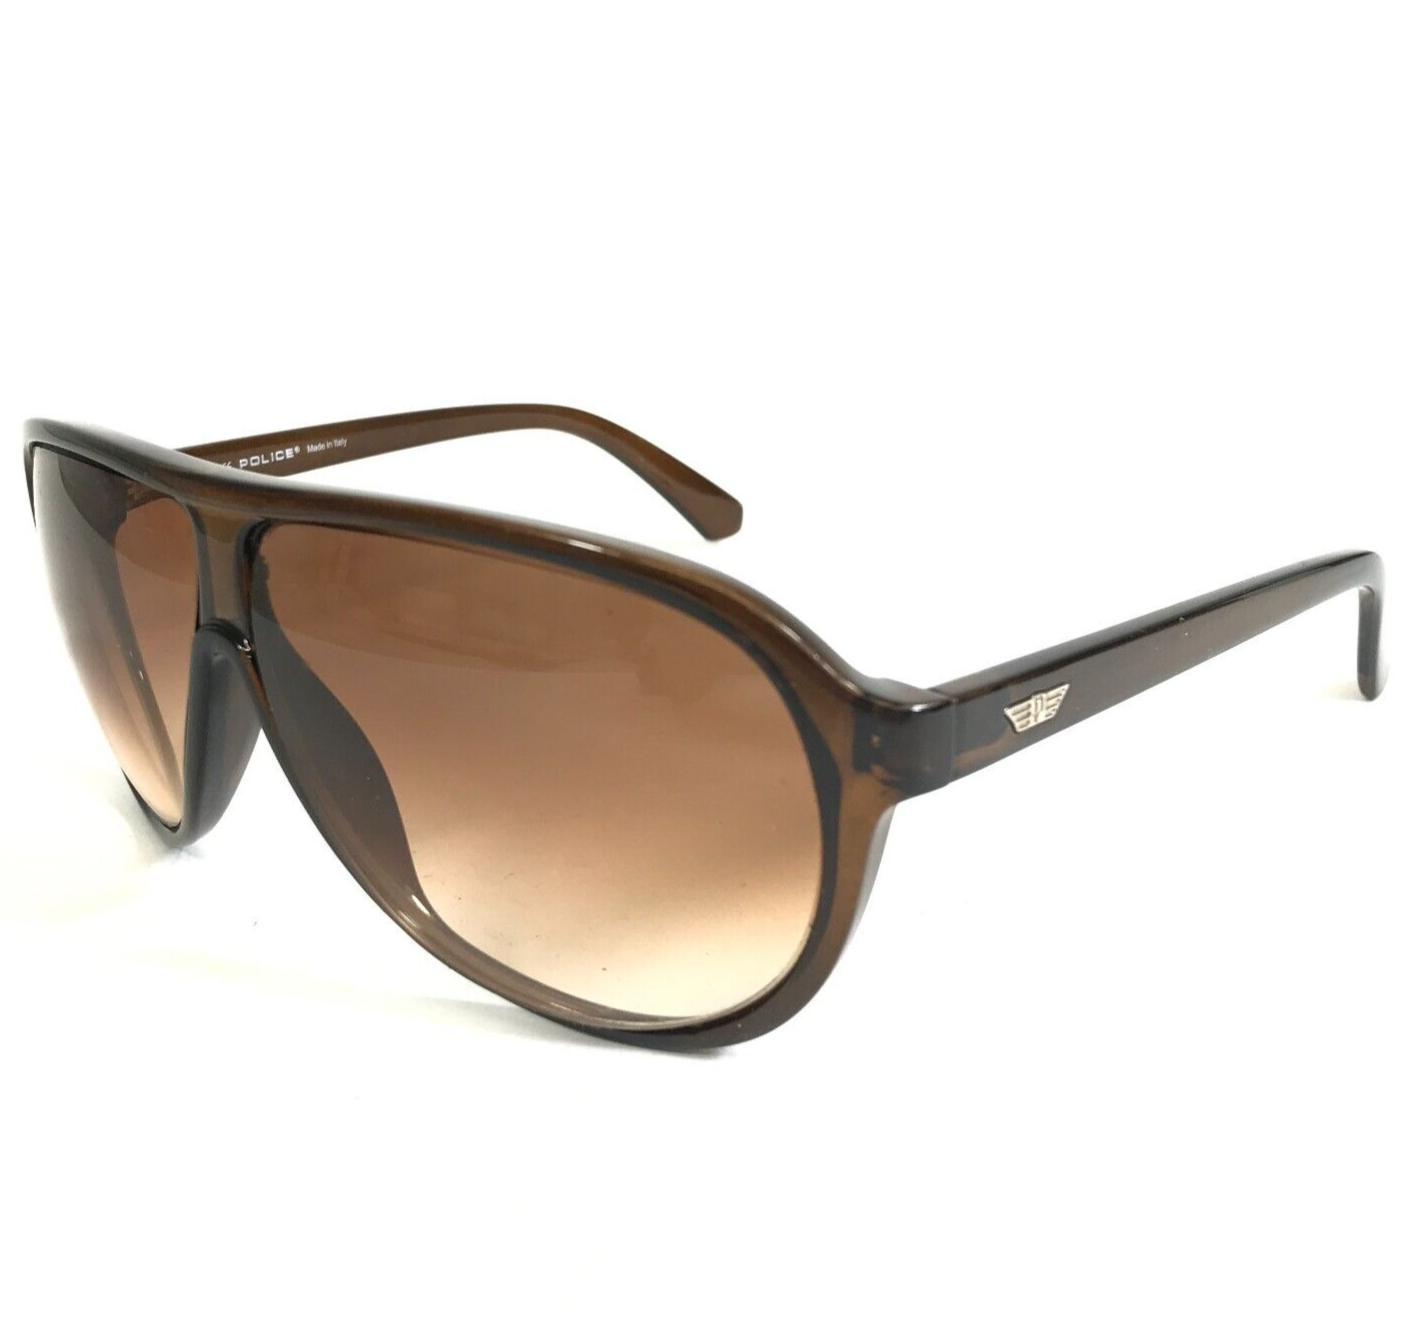 Primary image for Police Sunglasses S 1613 COL.0Z90 Clear Brown Round Frames with Brown Lenses